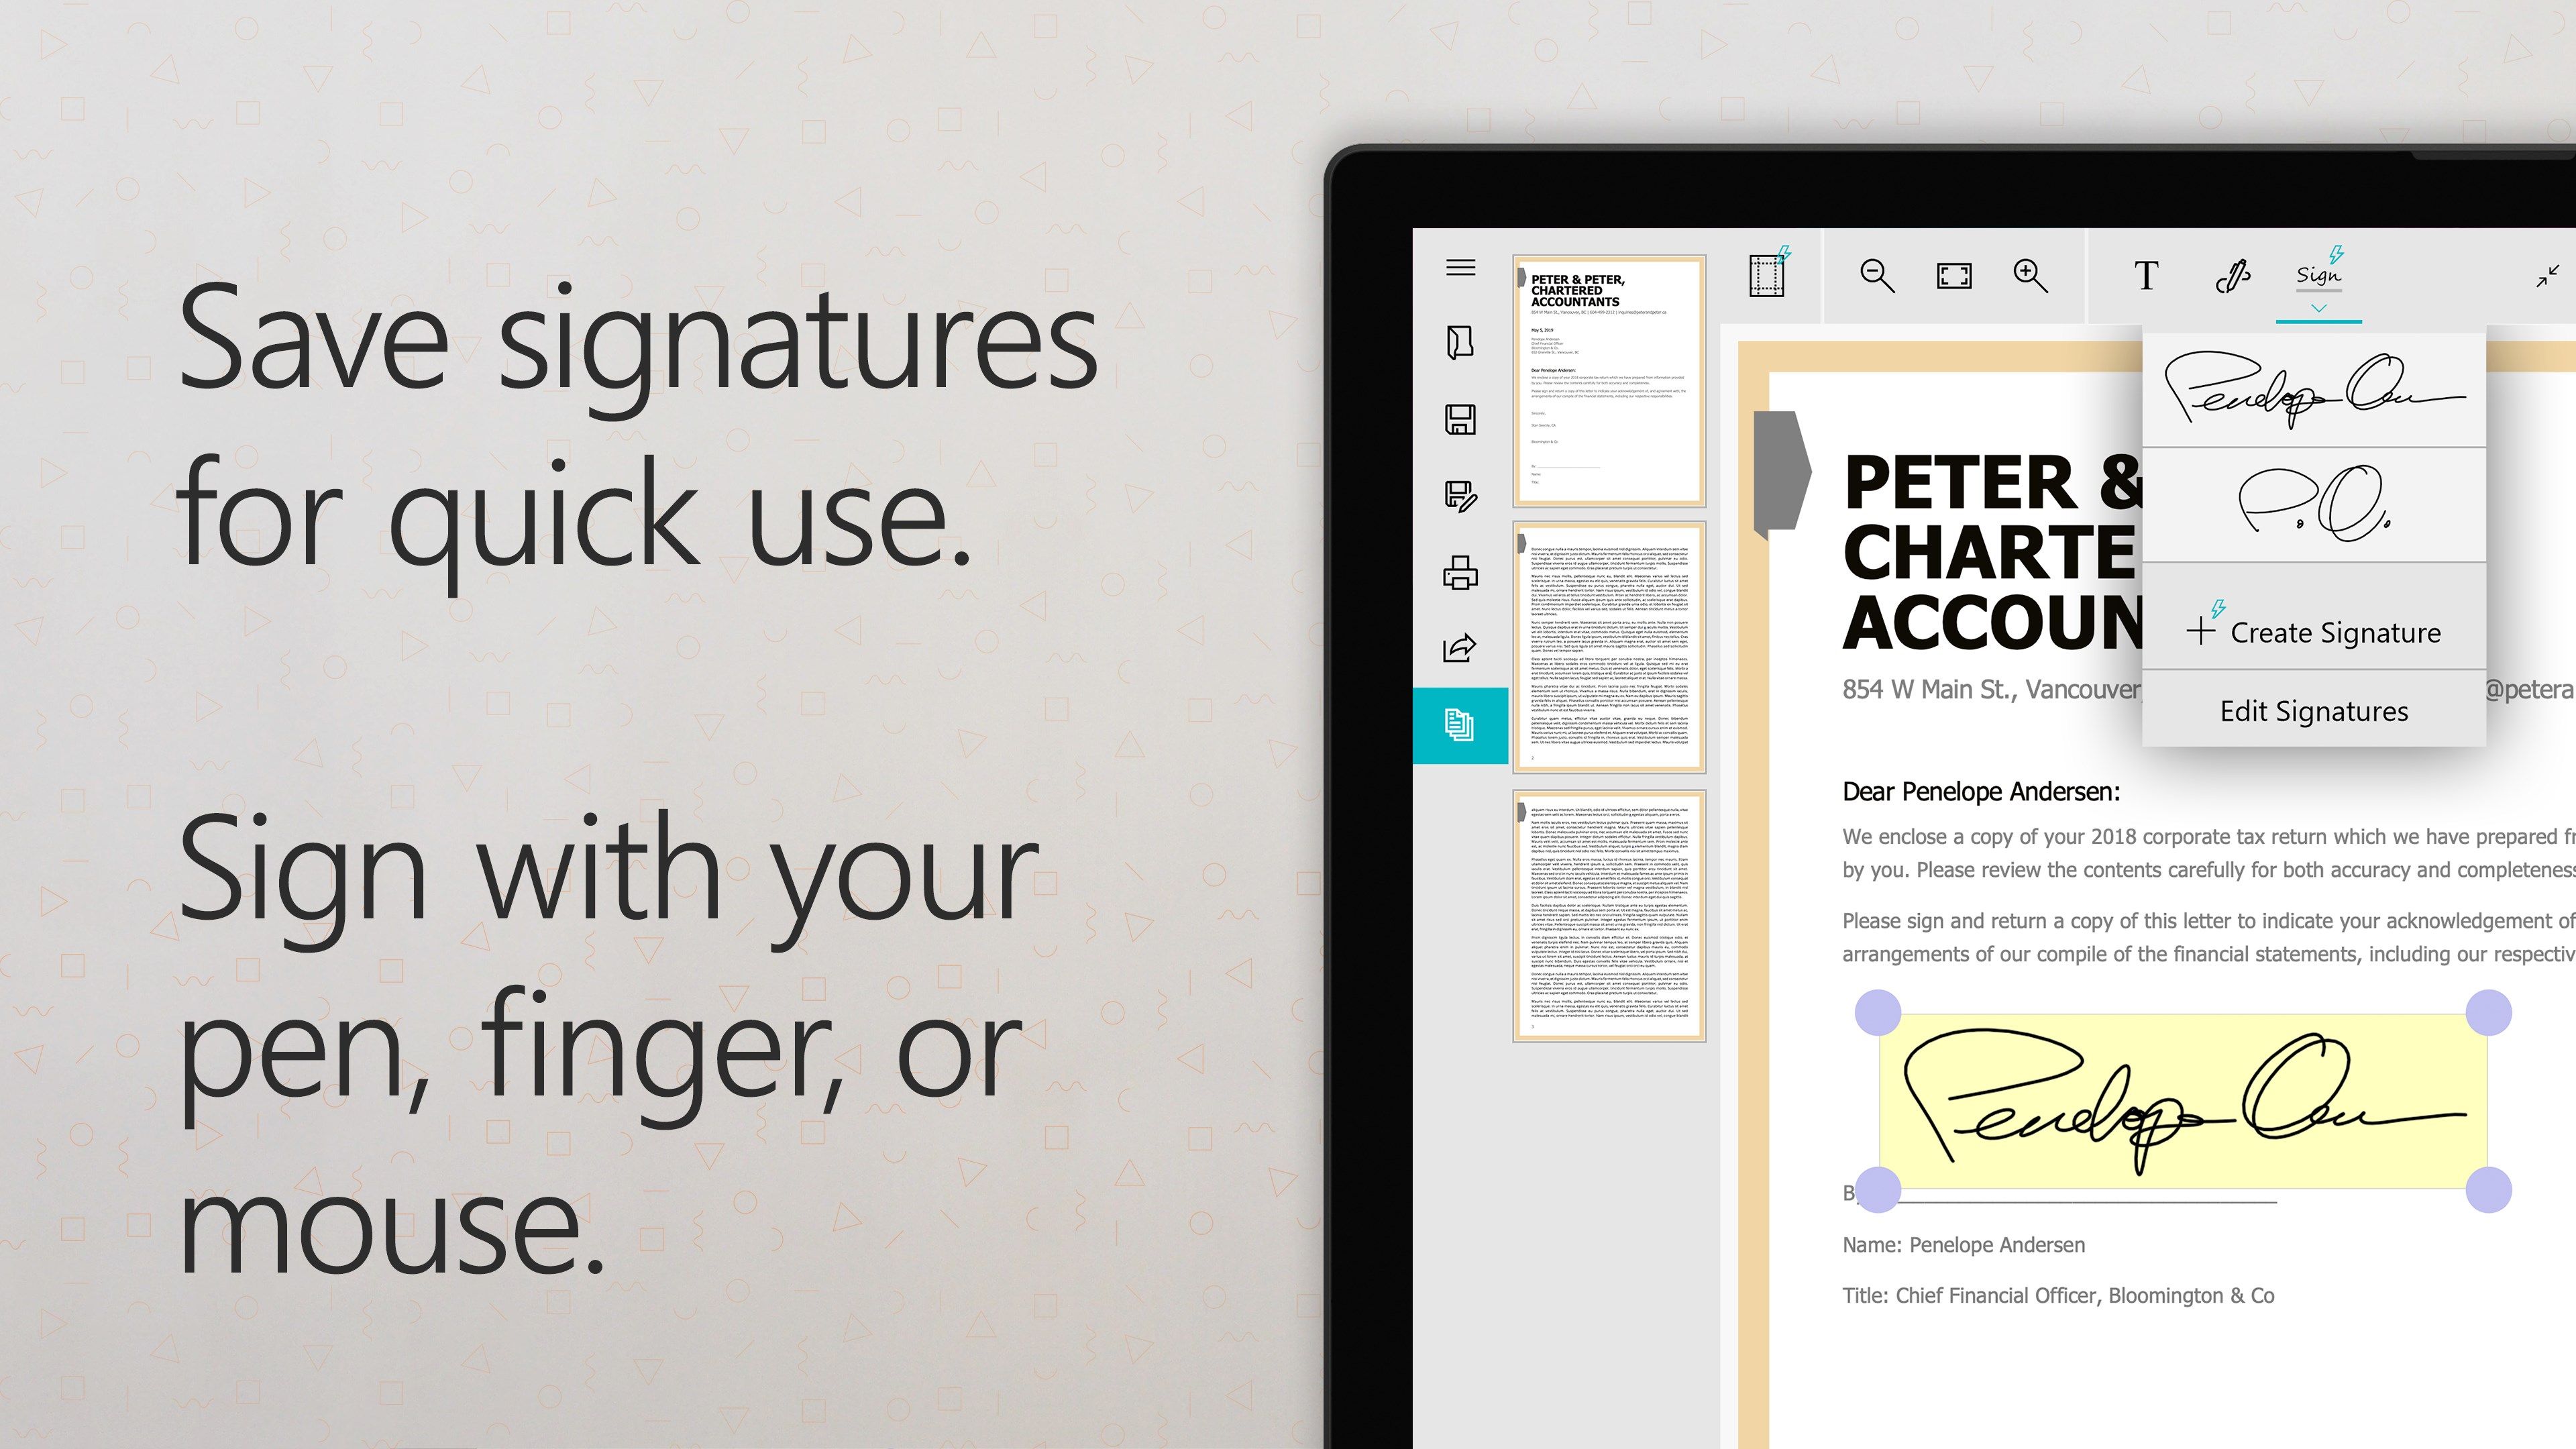 Save signatures. Sign PDFs with your pen, finger, or mouse.